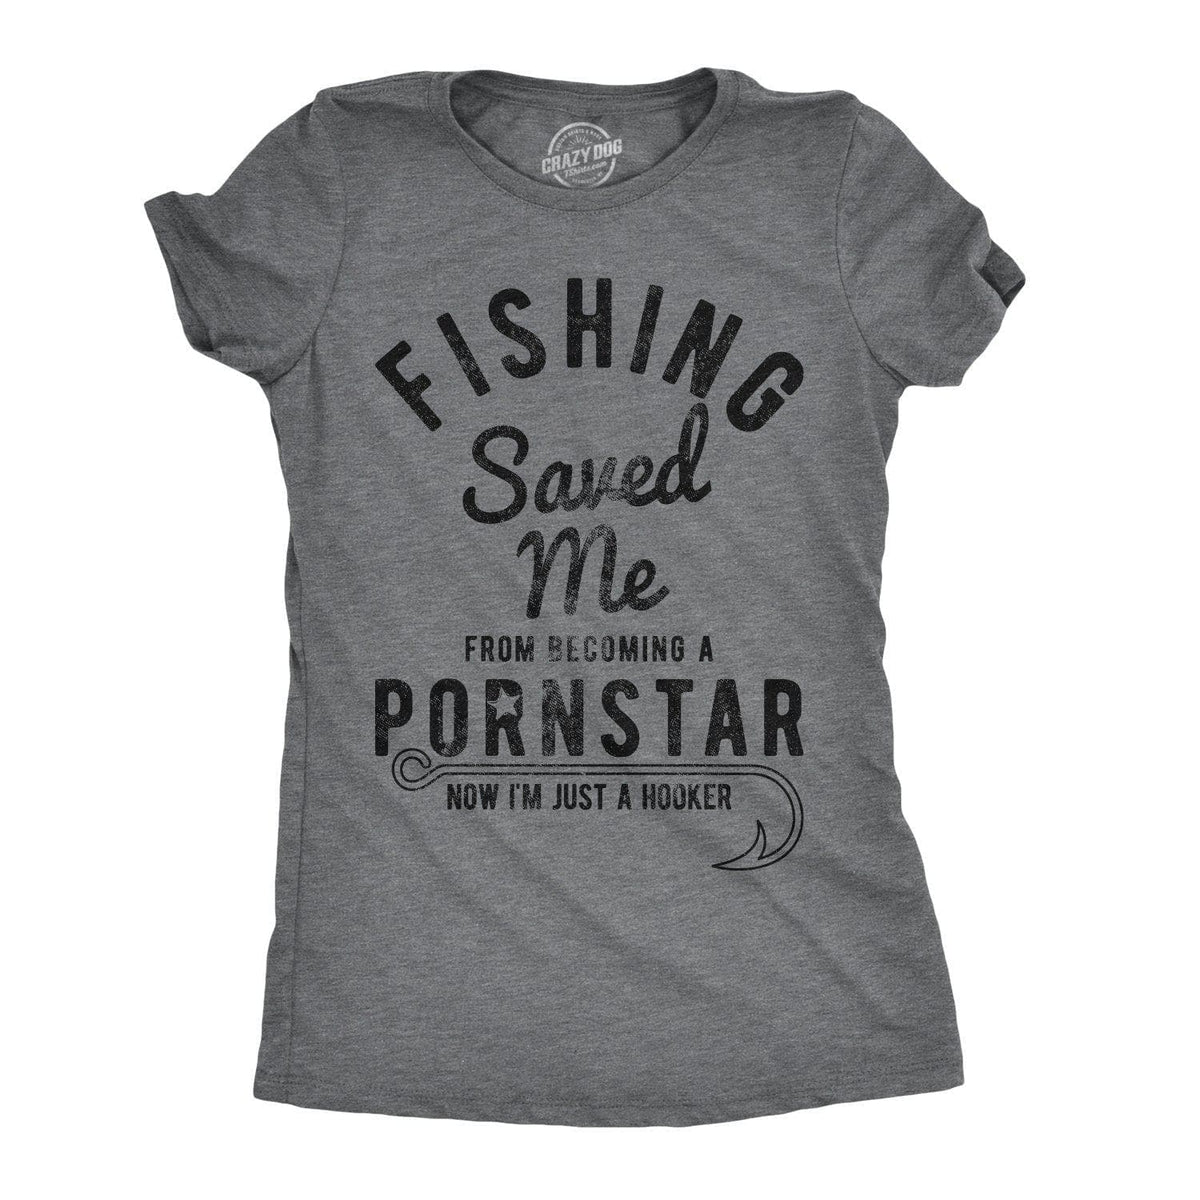 Fishing Saved Me From Becoming A Pornstar Women's T Shirt - Crazy